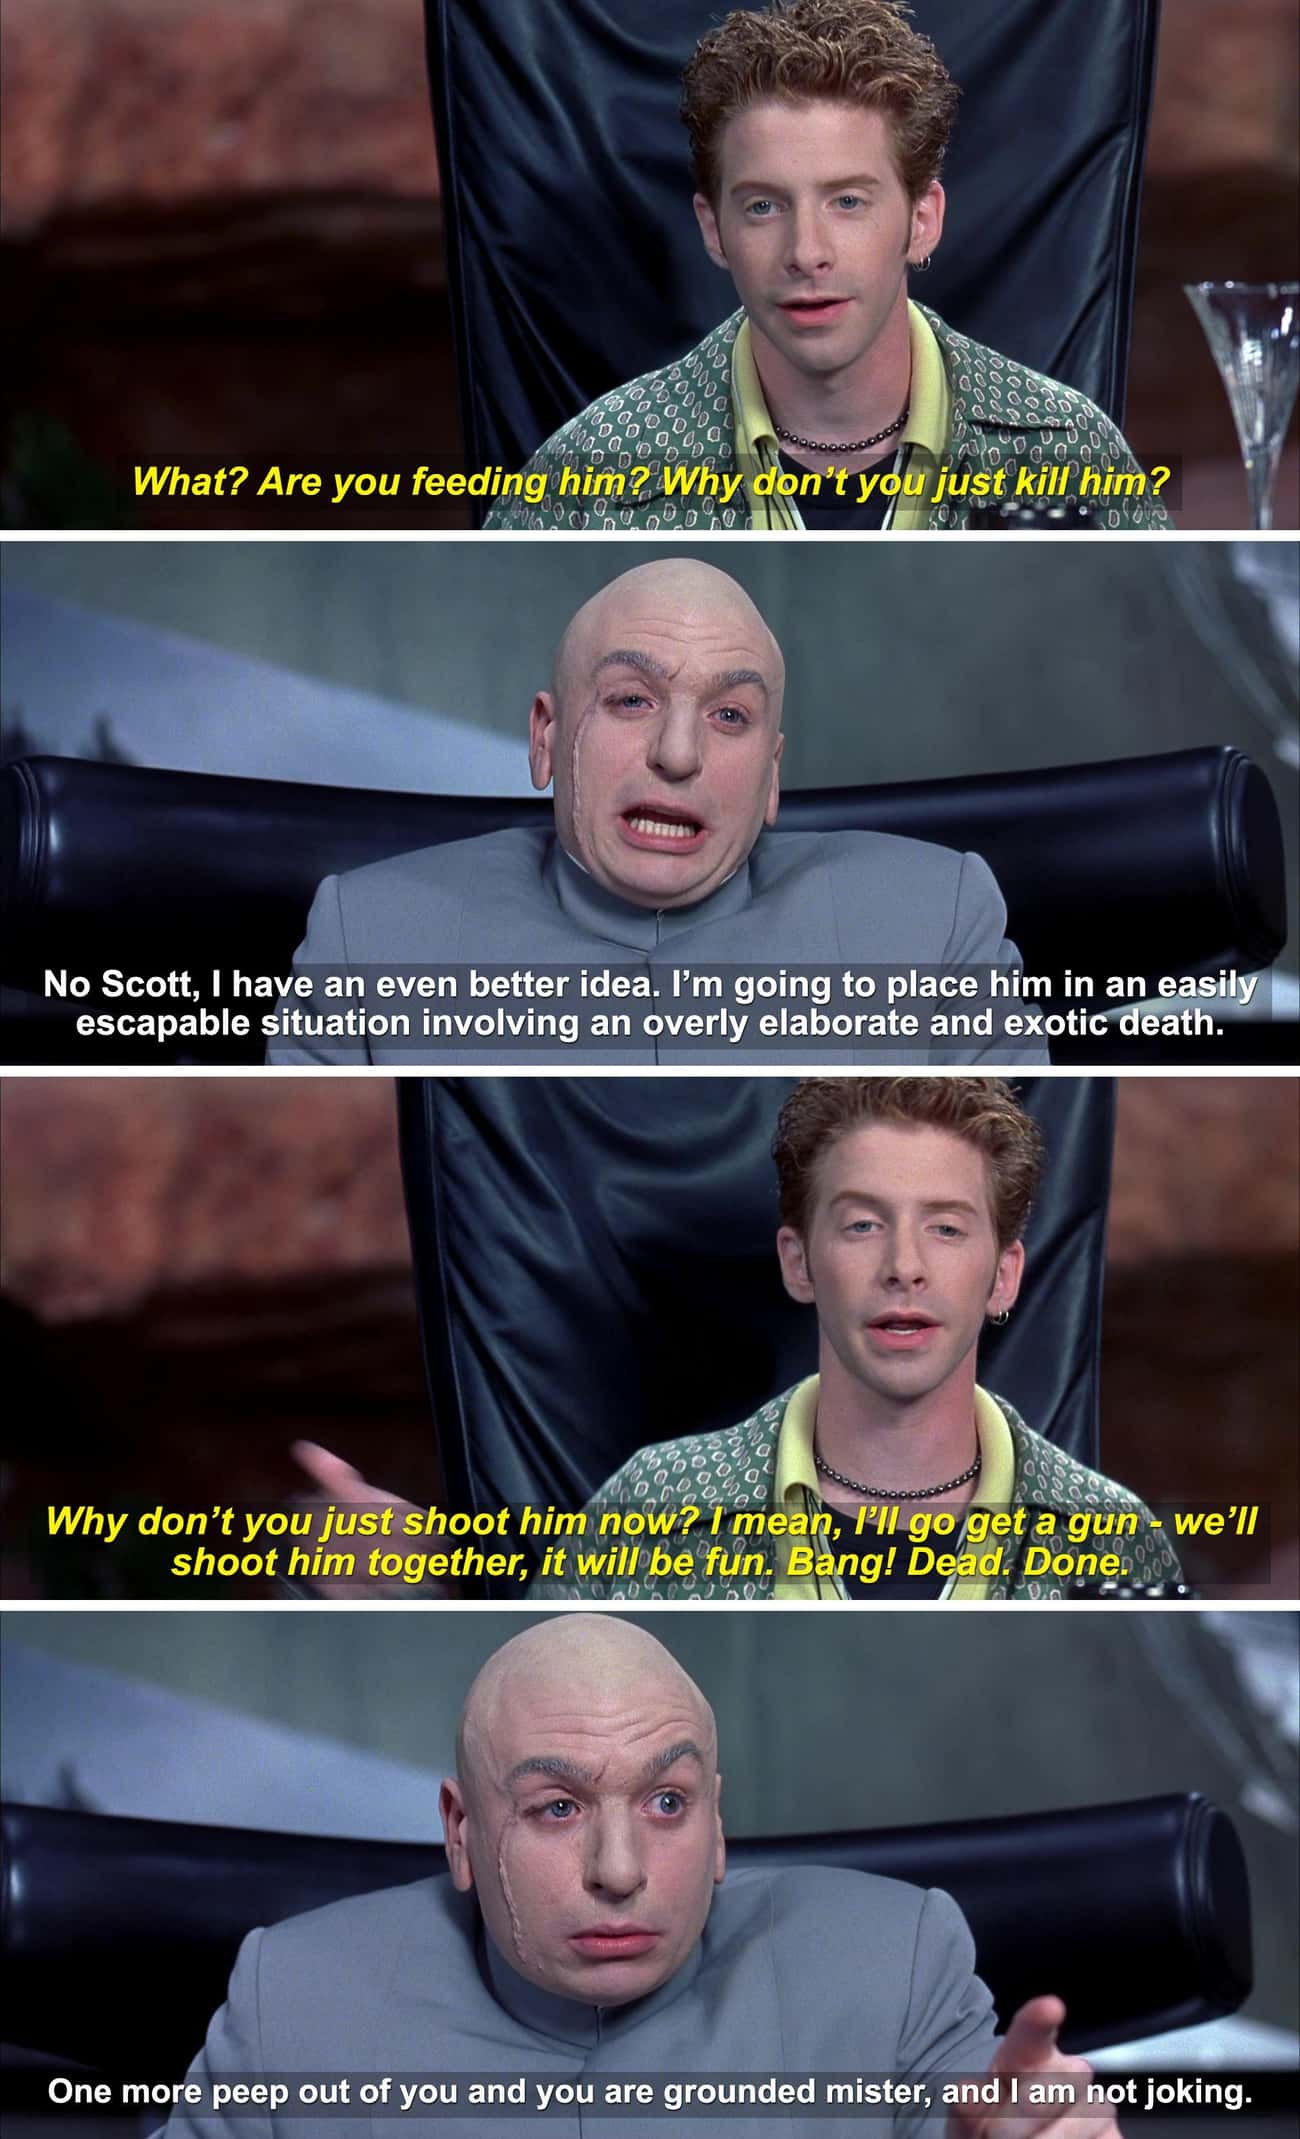 In ‘Austin Powers,’ Dr. Evil Puts Austin In A Slow, Escapable Trap Instead Of Just Finishing Him Off